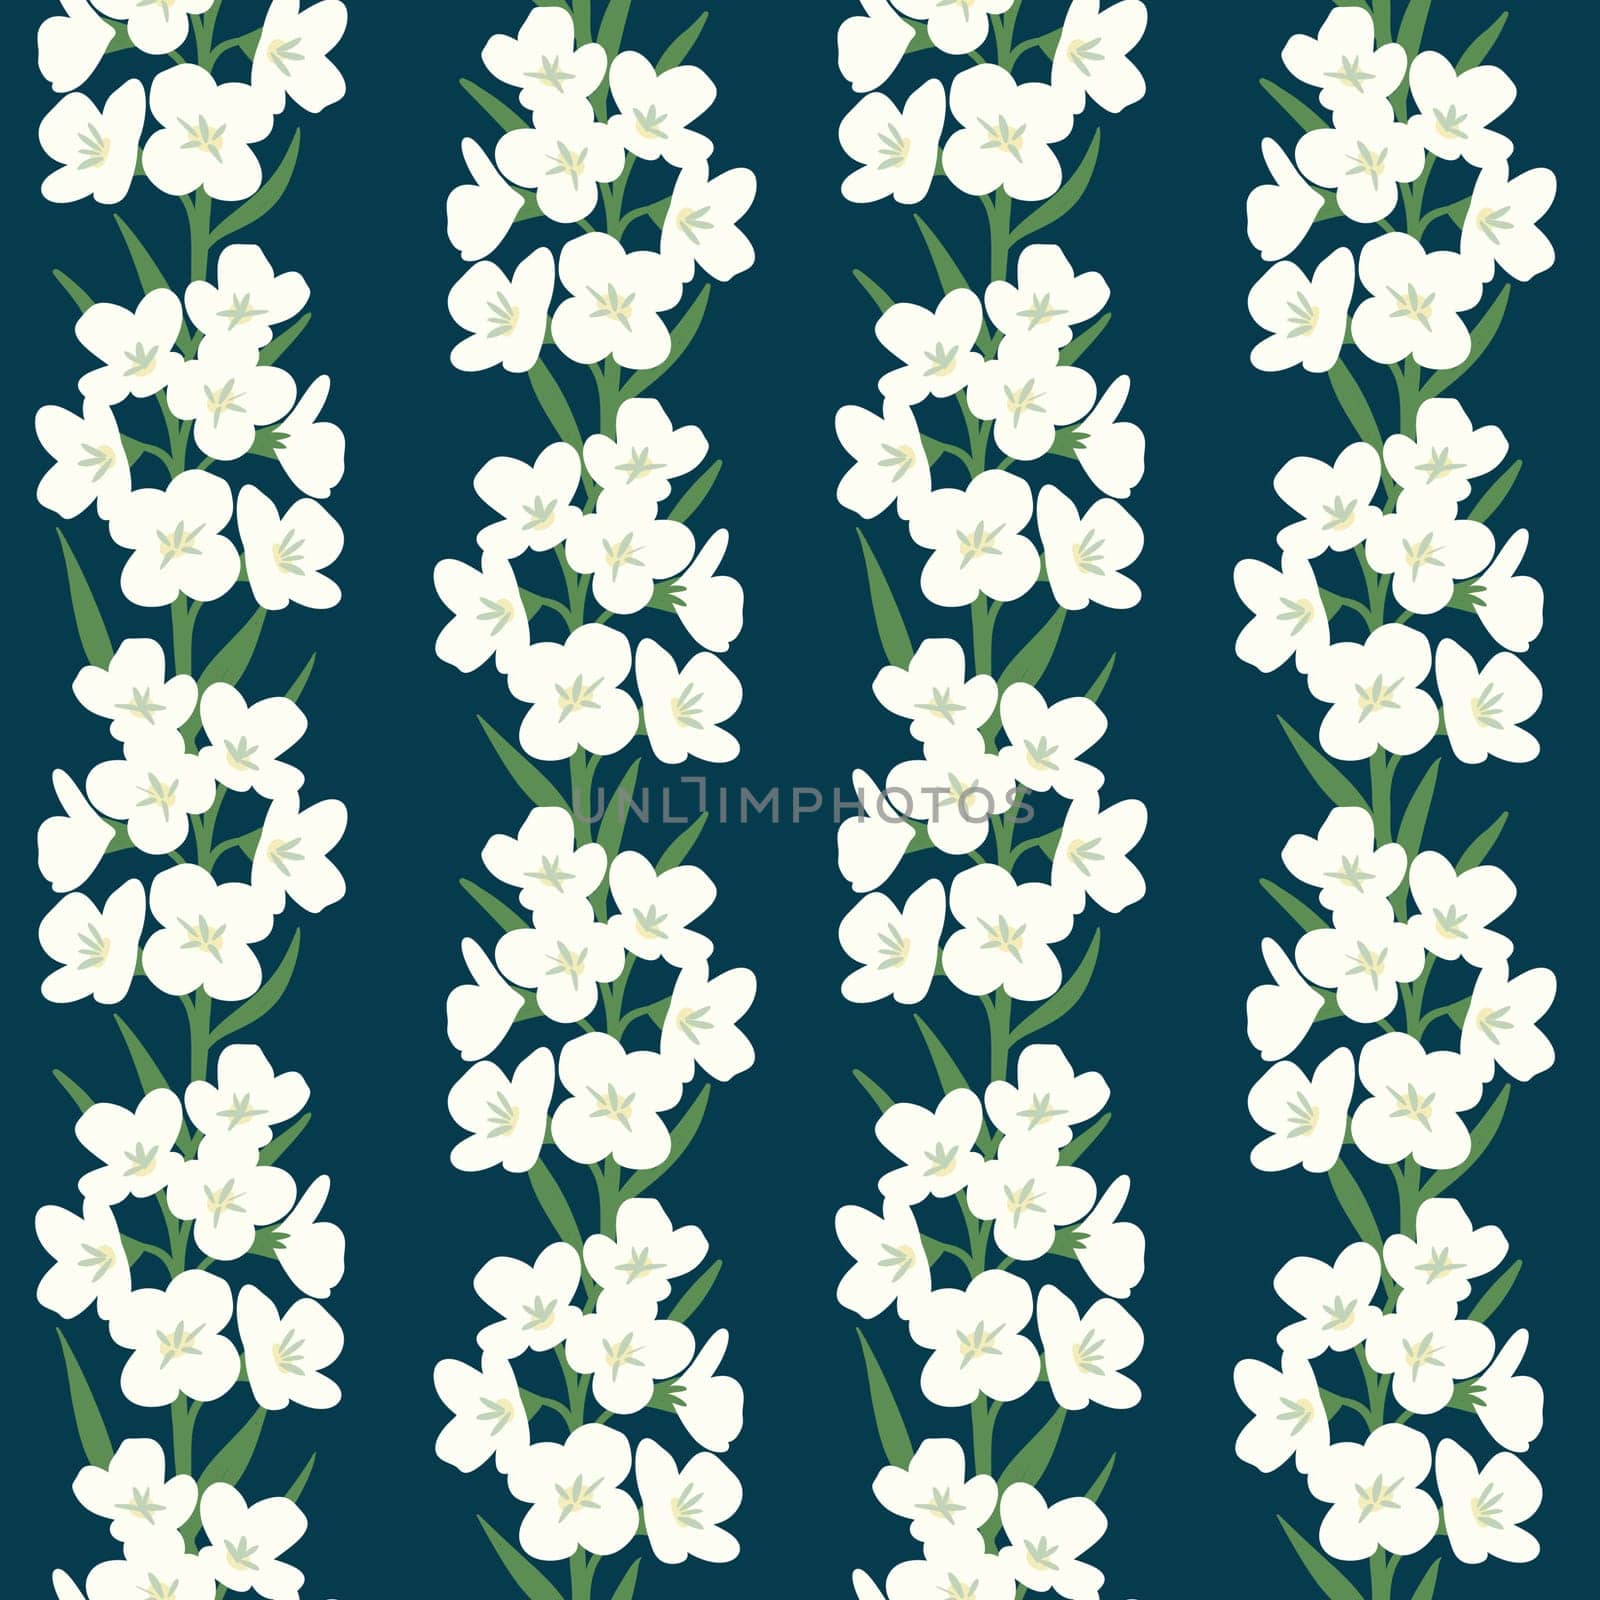 Hand drawn seamless pattern with white cuckoo flowers in vertical line on dark blue navy background. English meadow wildflower, floral wild plant, elegant victorian pattern, bloom blossom bouguet blooming botany design